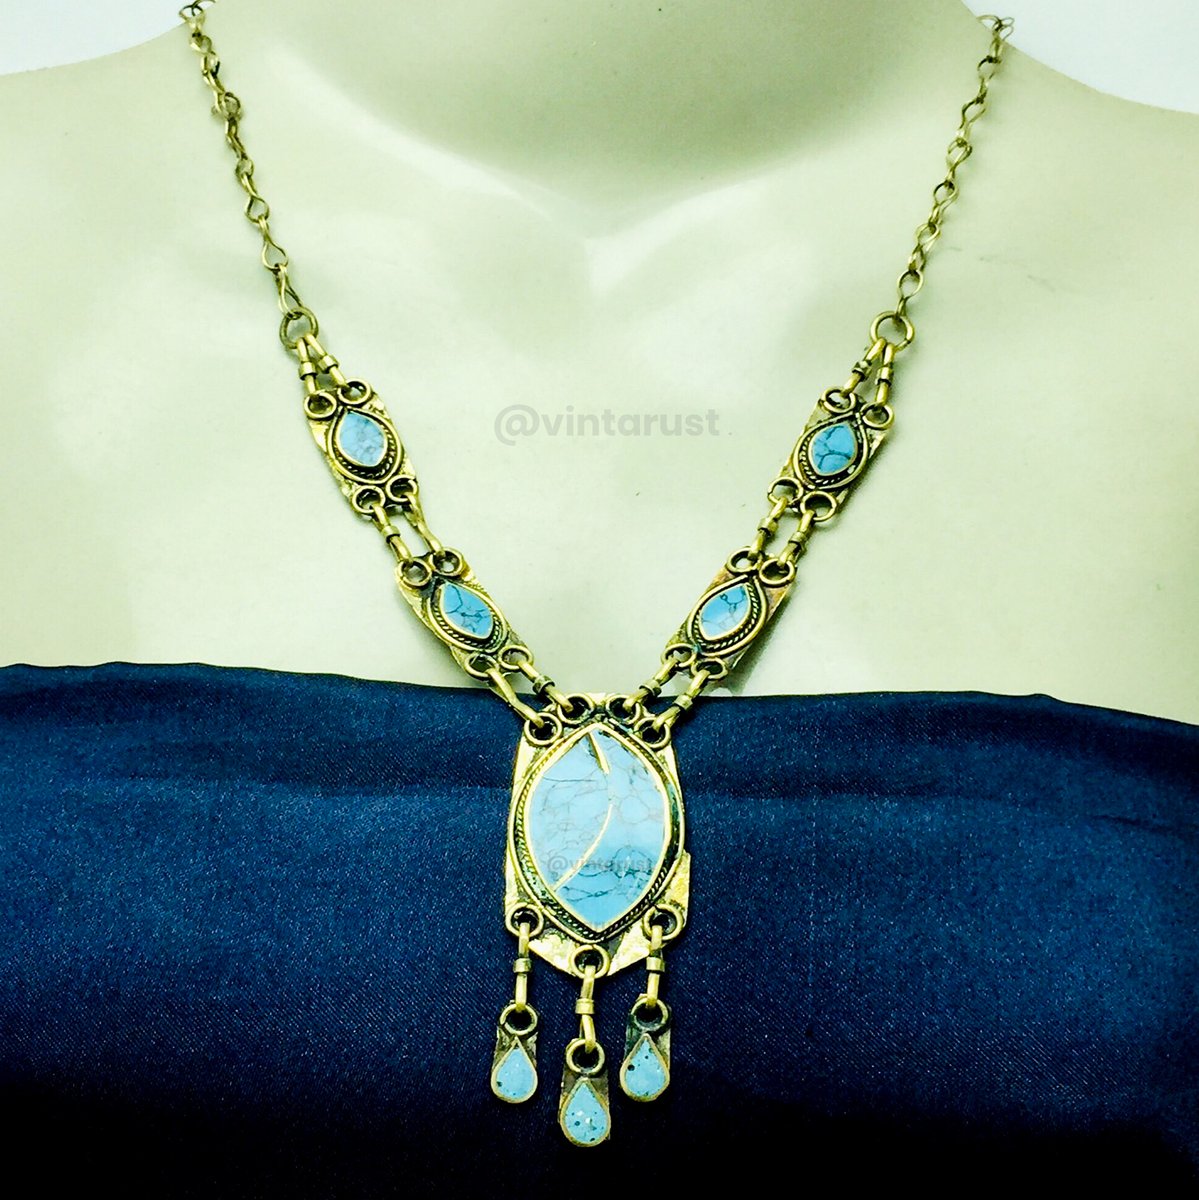 Tribal Light Weight Pendant Necklace.

Shop Now:
buff.ly/3MEUAYK

#tribaltreasures #vintagevibes #turquoisetales #craftedwithlove #southasianstyle #culturalchic #regalbeauty #jewelrygoals #fashioninspiration #vintarust #turquoisejewelry #turquoisegems #turquoiselove